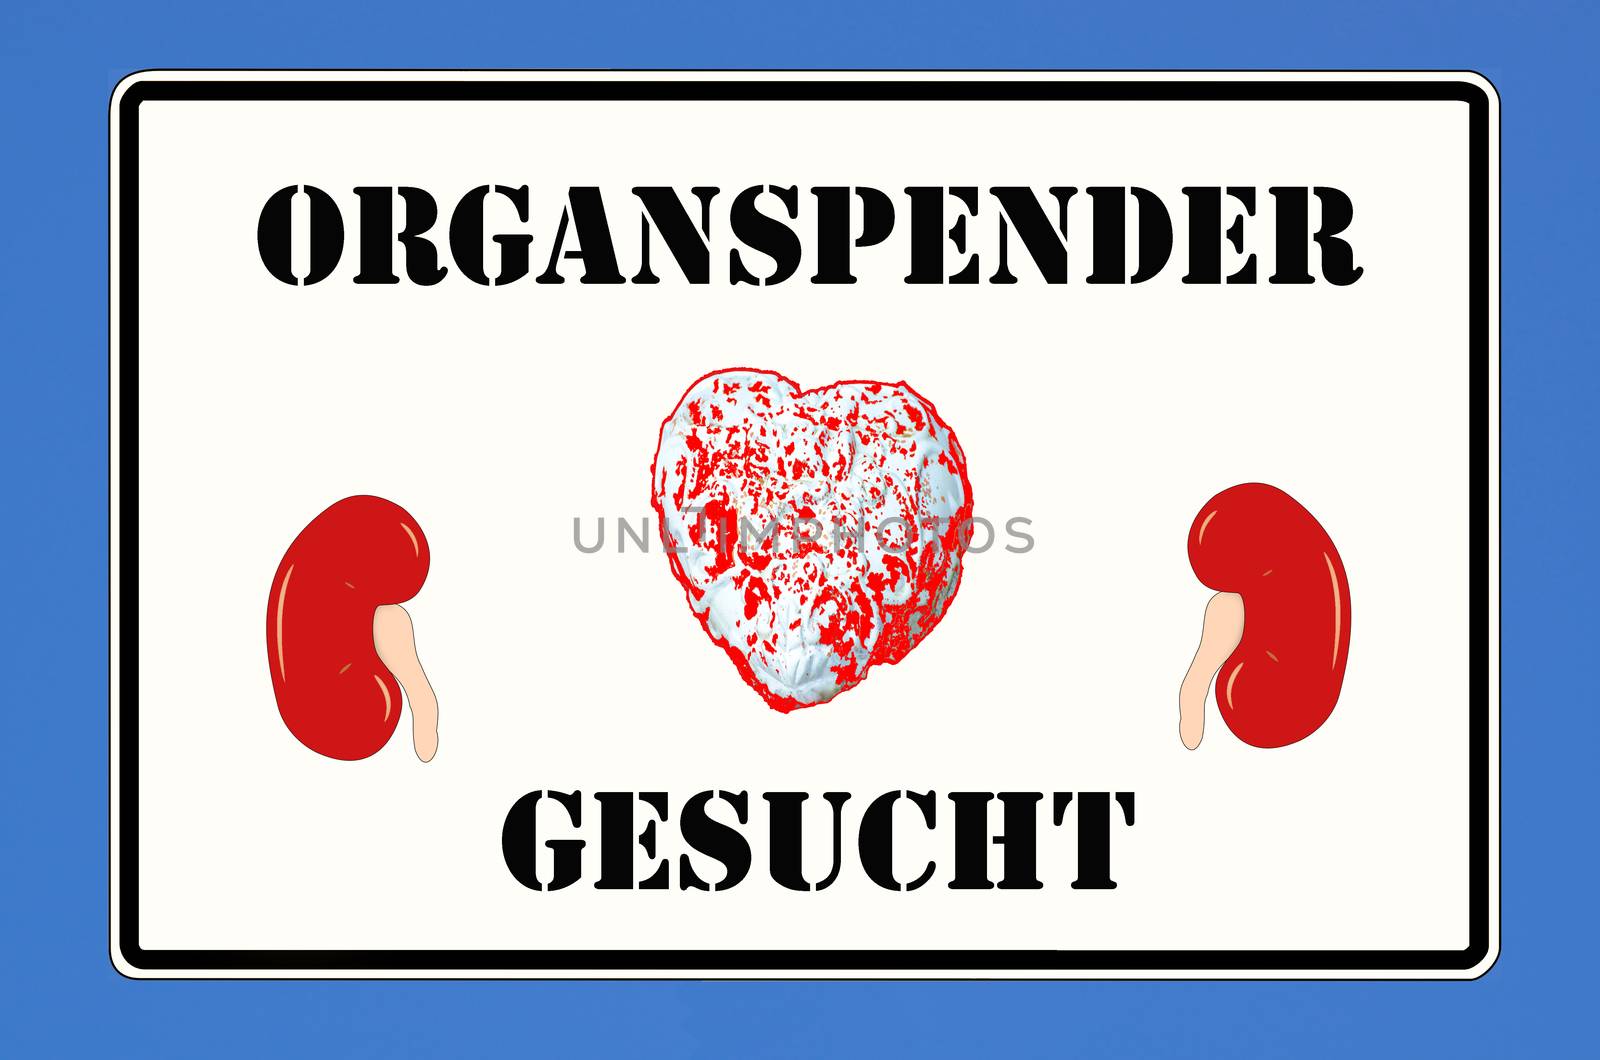 Looking for Organ Donors by JFsPic